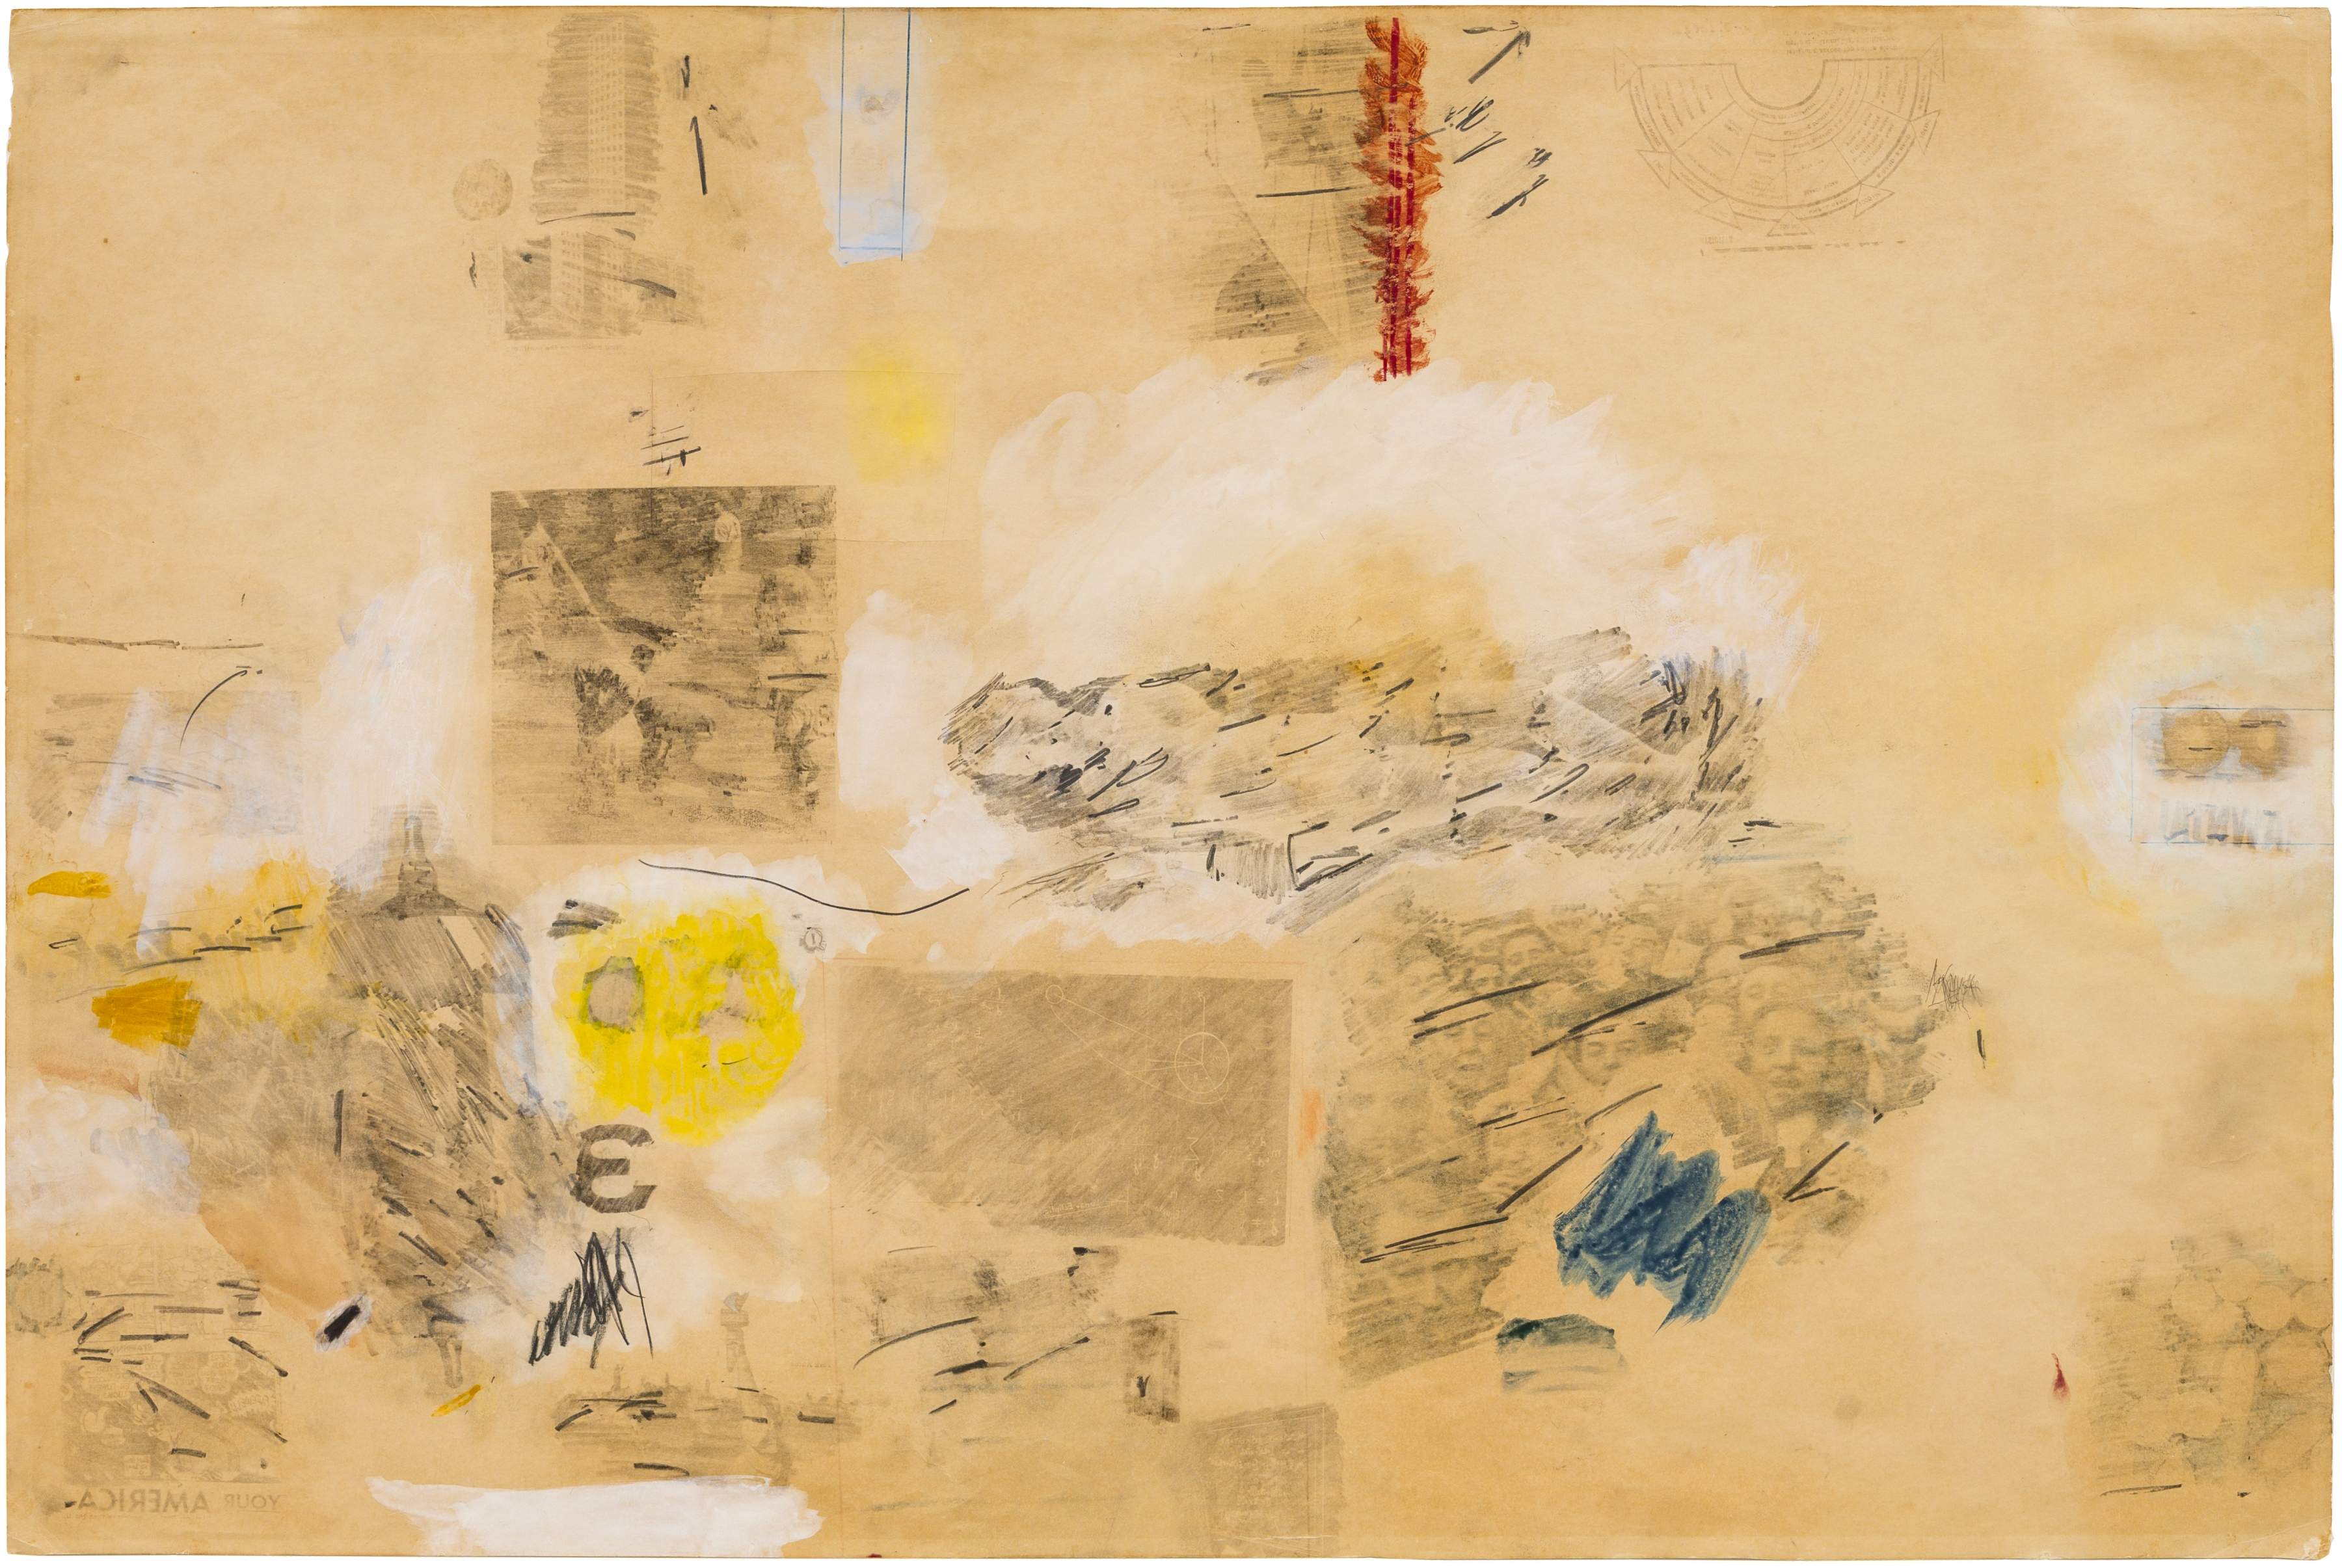 
ROBERT RAUSCHENBERG (1925-2008)

A-Muse
1958
combine drawing of solvent transfer, graphite, transparent&nbsp;and opaque watercolor, and oil pastel on buff wove paper
23 5/8 x 35 1/2 inches
&nbsp; (60 x 90.2 cm)

&nbsp;

signed and dated verso lower right: &quot;RAUSCHENBERG 1958&quot;


Provenance:
Leo Castelli Gallery, New York (Registry #LCD-17)
W.B. Dixon Stroud, Pennsylvania
private collection, Connecticut (by descent)

Literature:&nbsp;
Krčma, Ed. Rauschenberg / Dante: Drawing a Modern Inferno&nbsp;
(New Haven: Yale University Press, 2017).
Illustrated in color, double-page spread, pp. 128-129.

&nbsp;